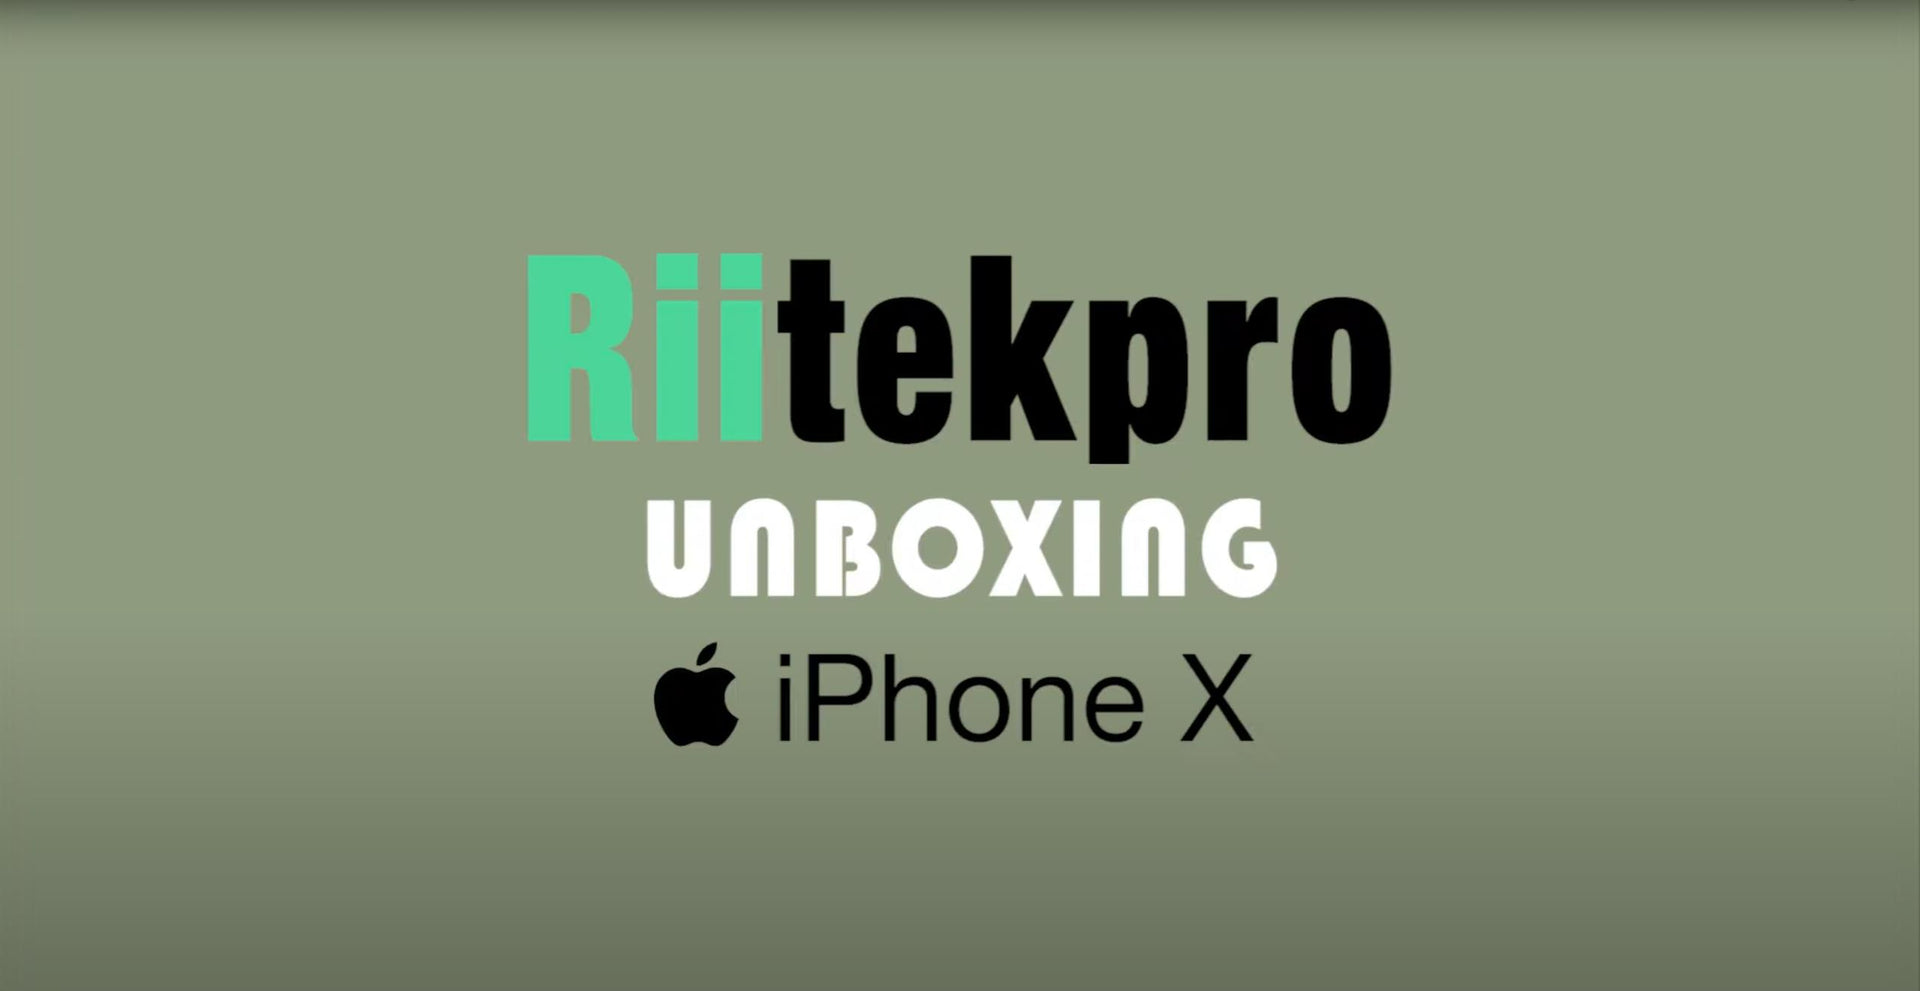 Load video: Riitekpro iPhone Unboxing